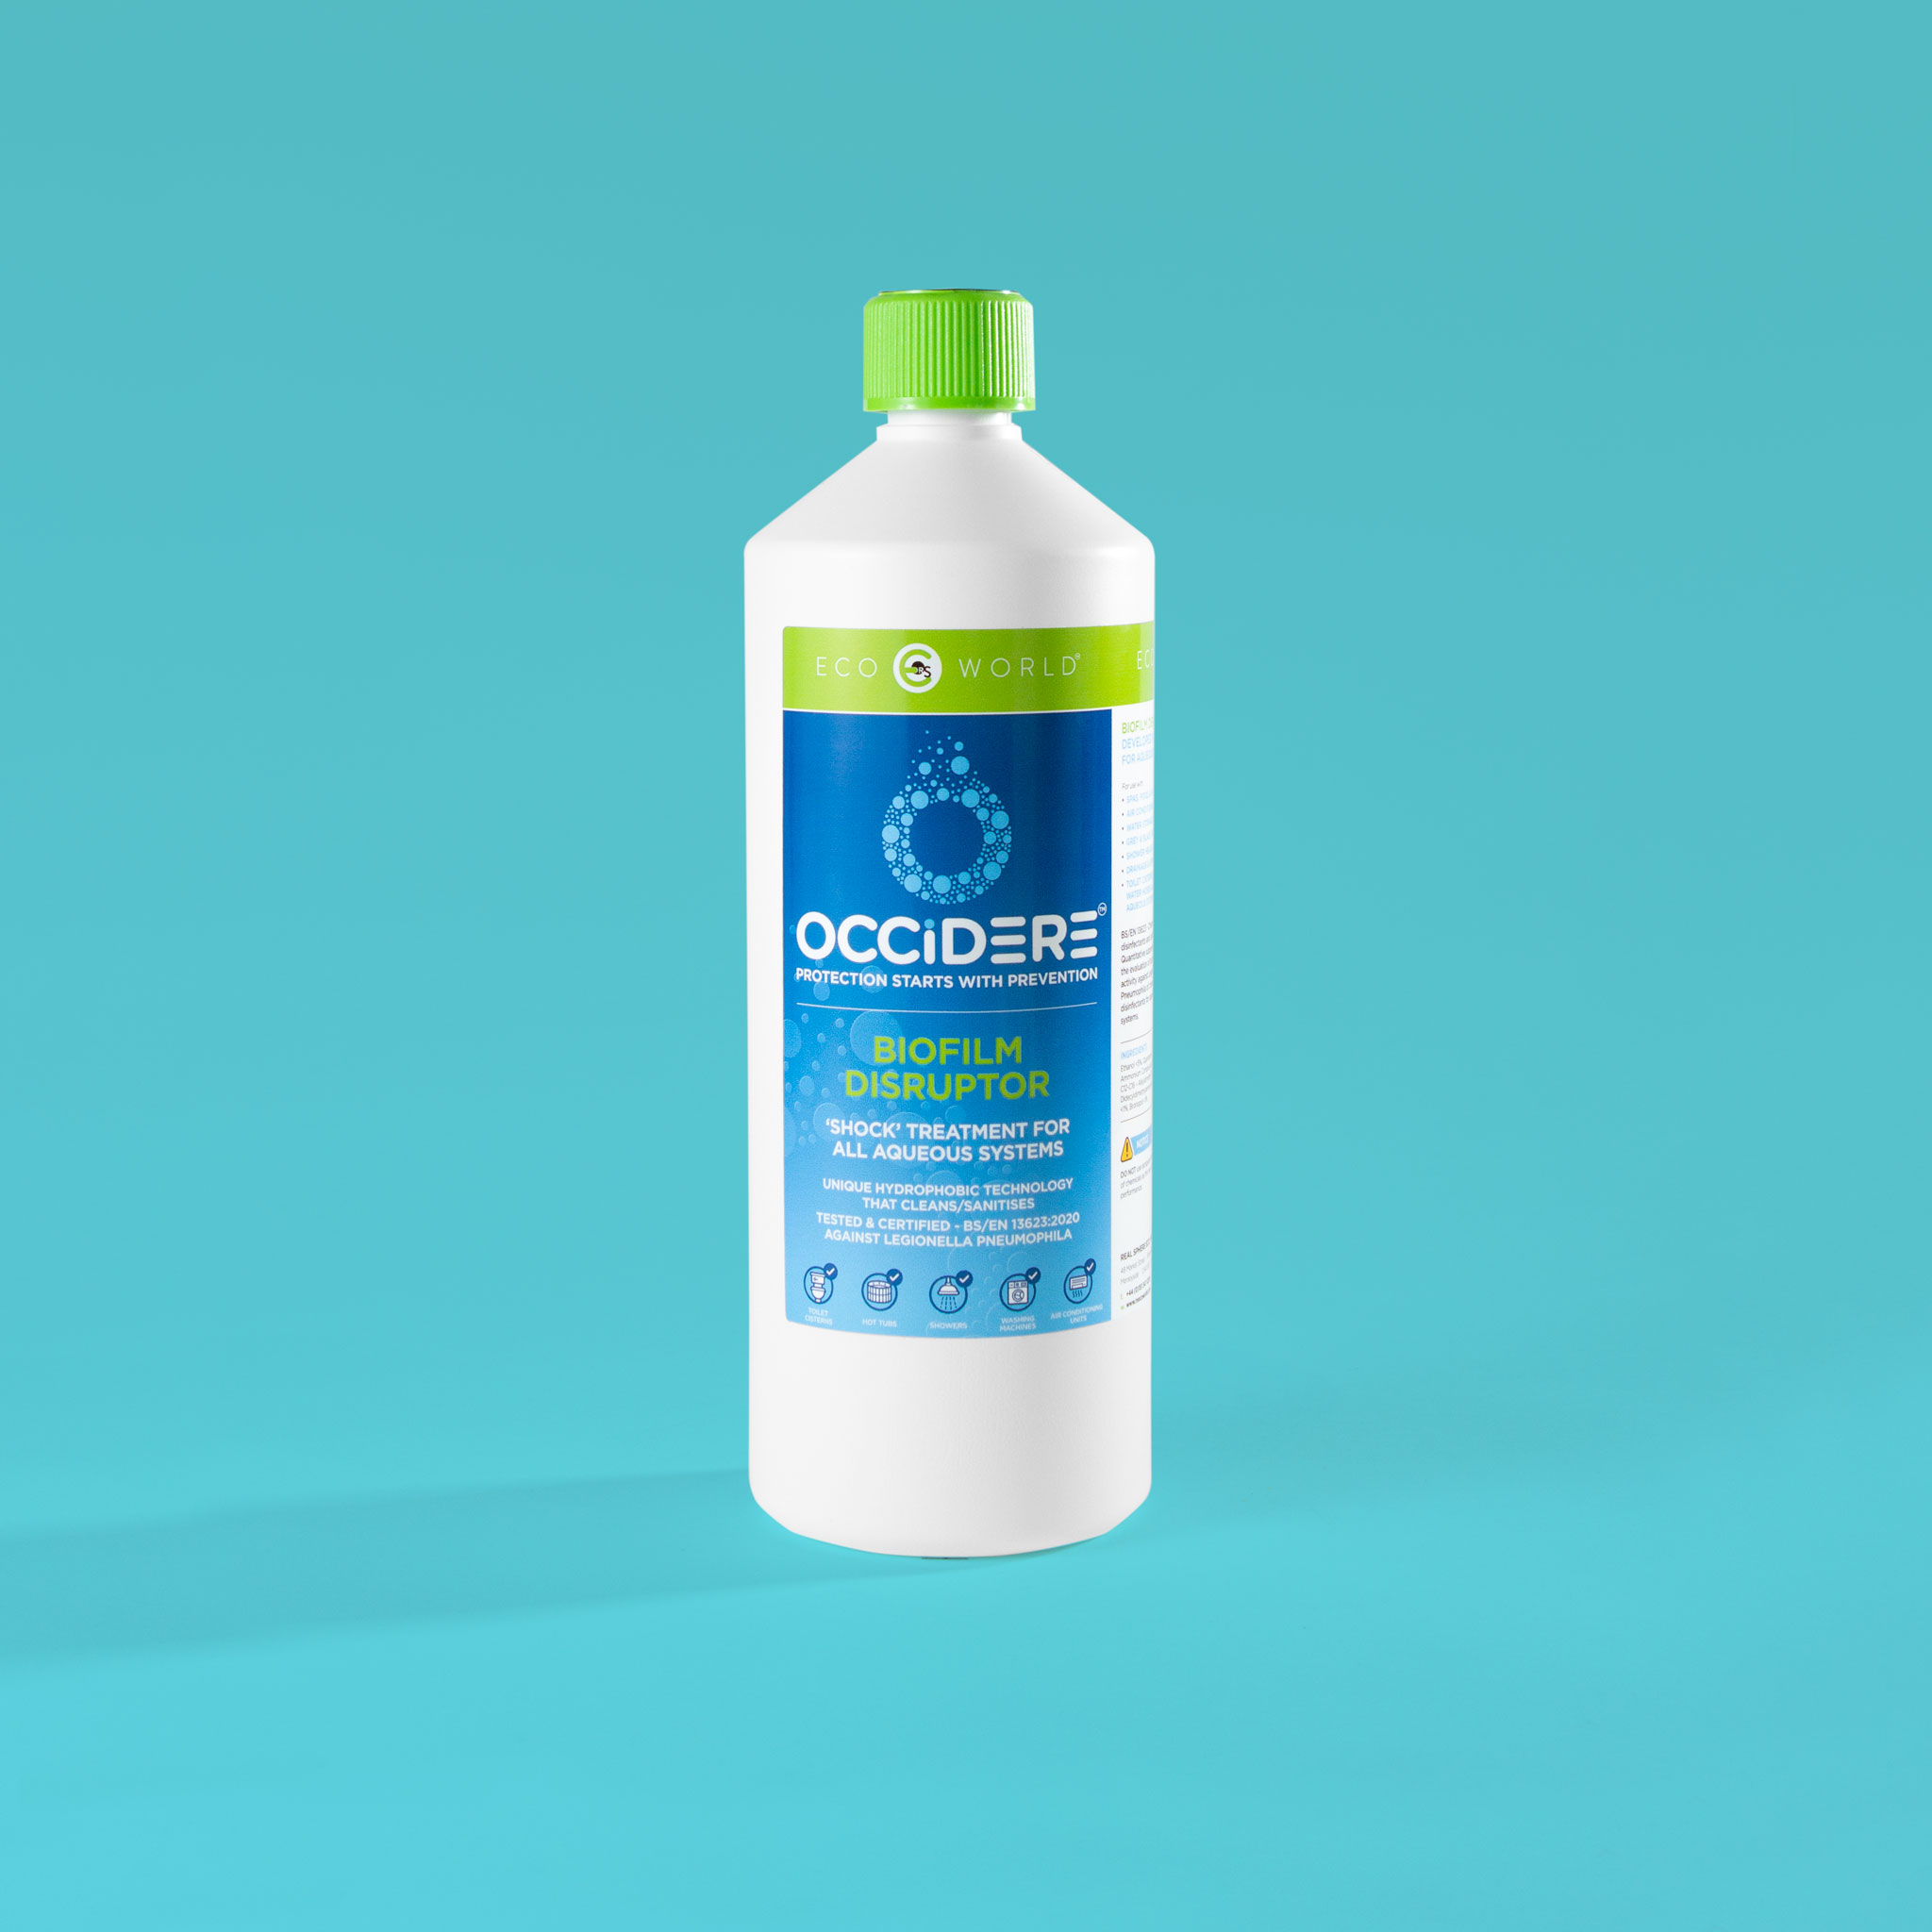 Occidere surface cleaning products